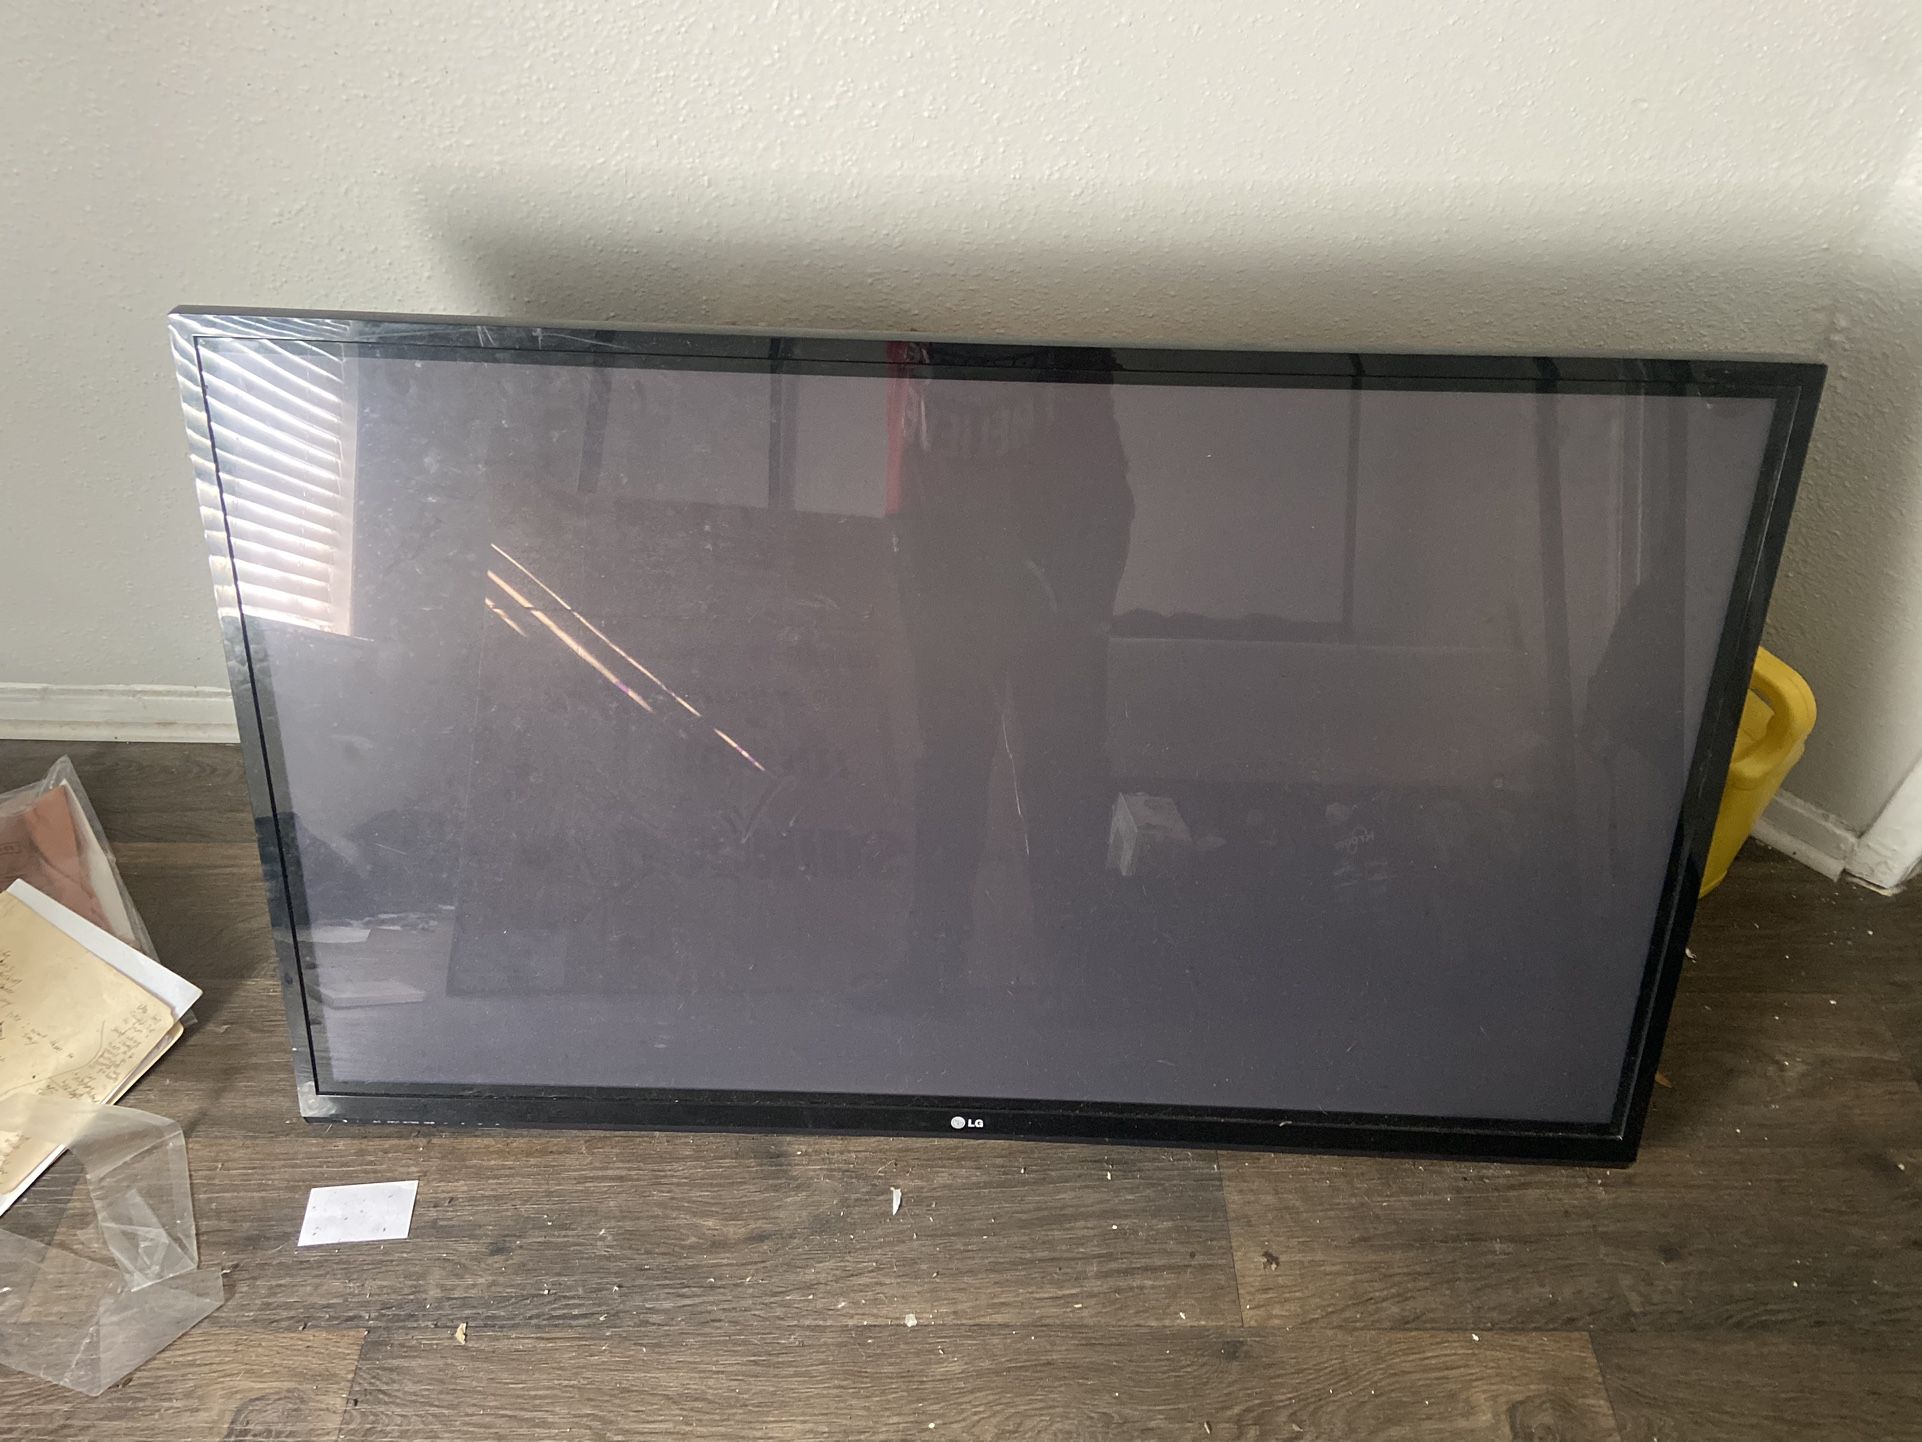 TV FOR SALE